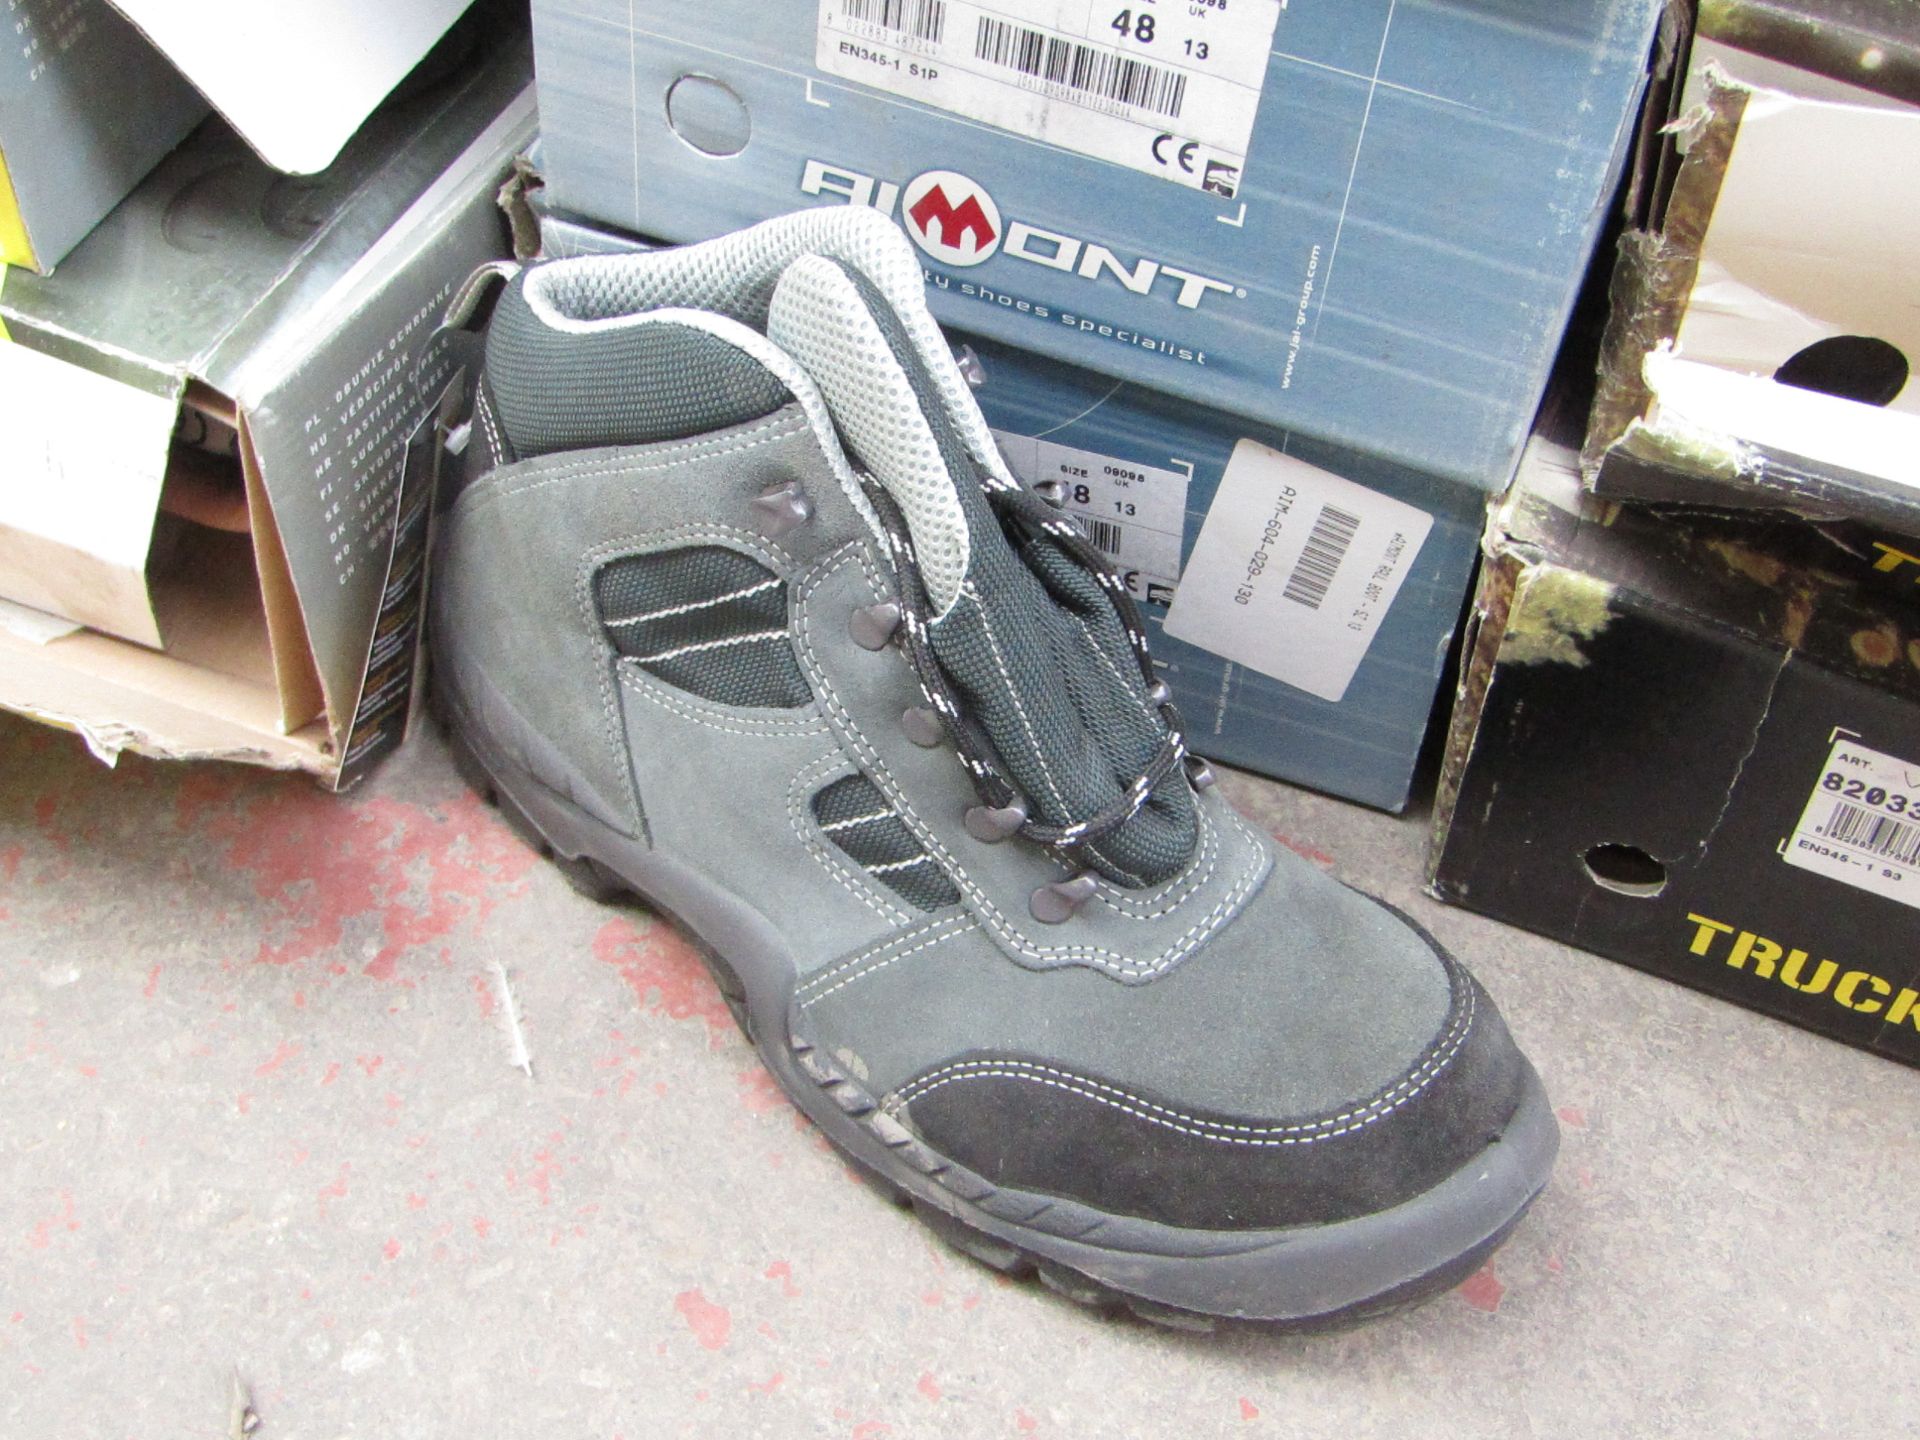 Aimont Safety Specialists steel toe cap Boots, size 13, new and boxed.